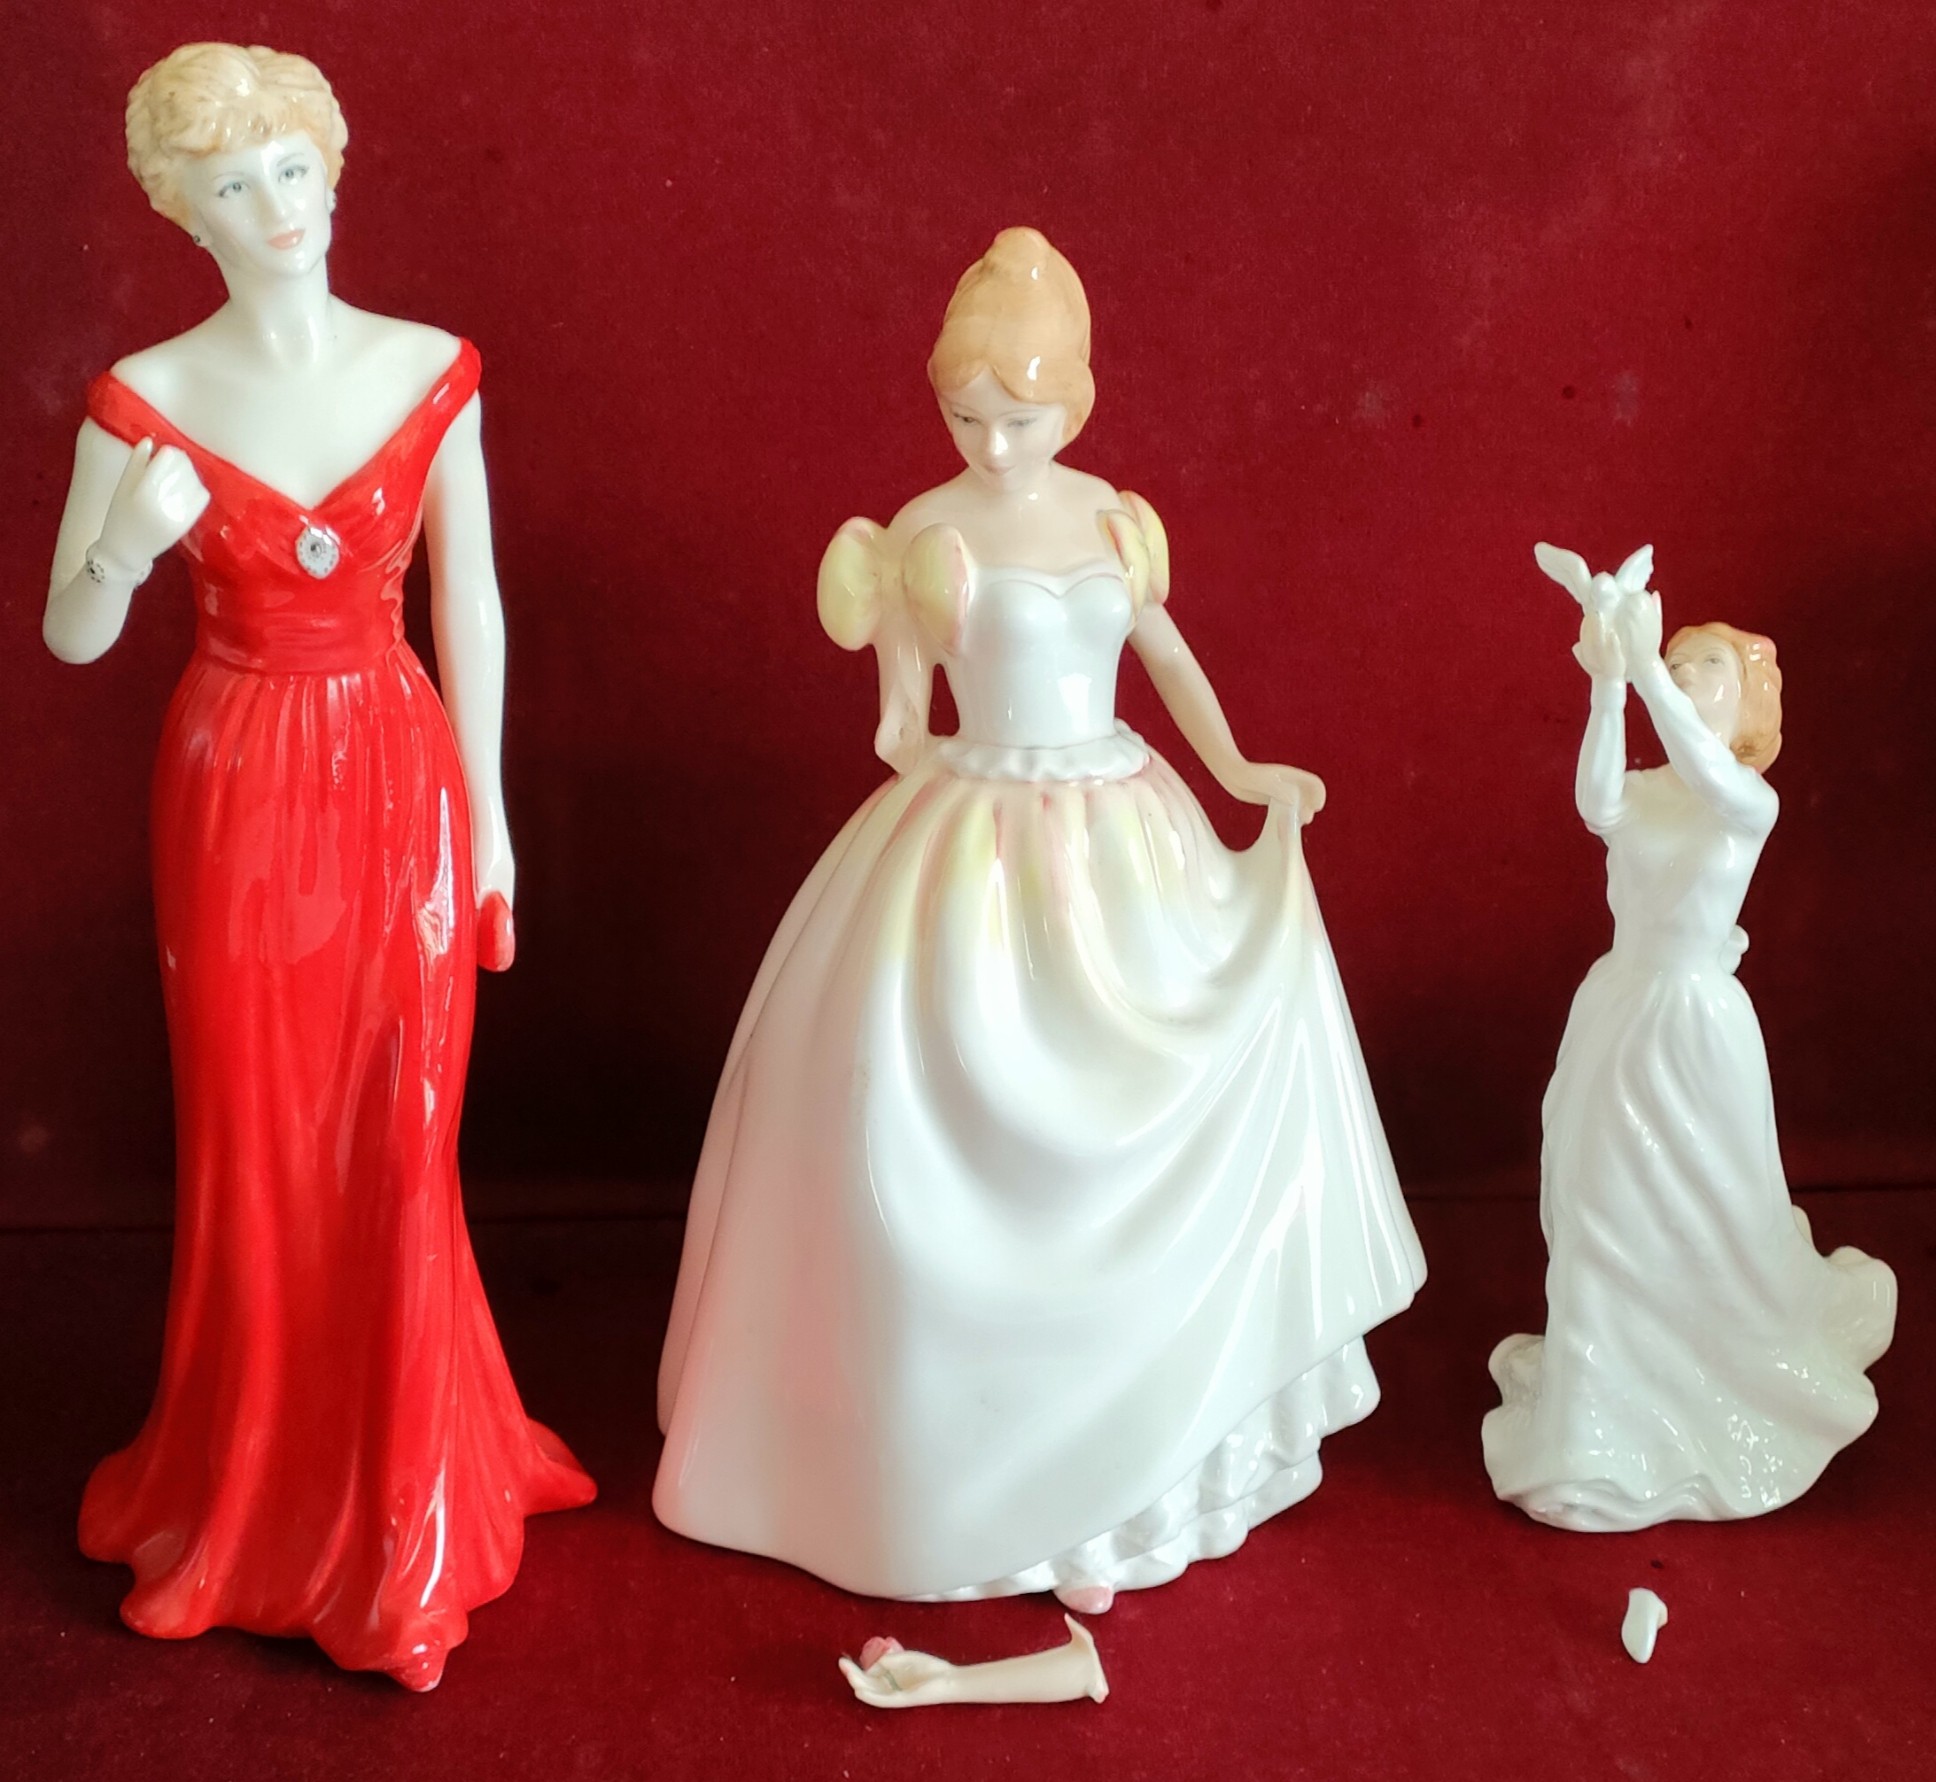 TWO ROYAL DOULTON FIGURES PLUS ROYAL WORCESTER FIGURE "TO CELEBRATE THE LIFE OF DIANA, PRINCESS OF